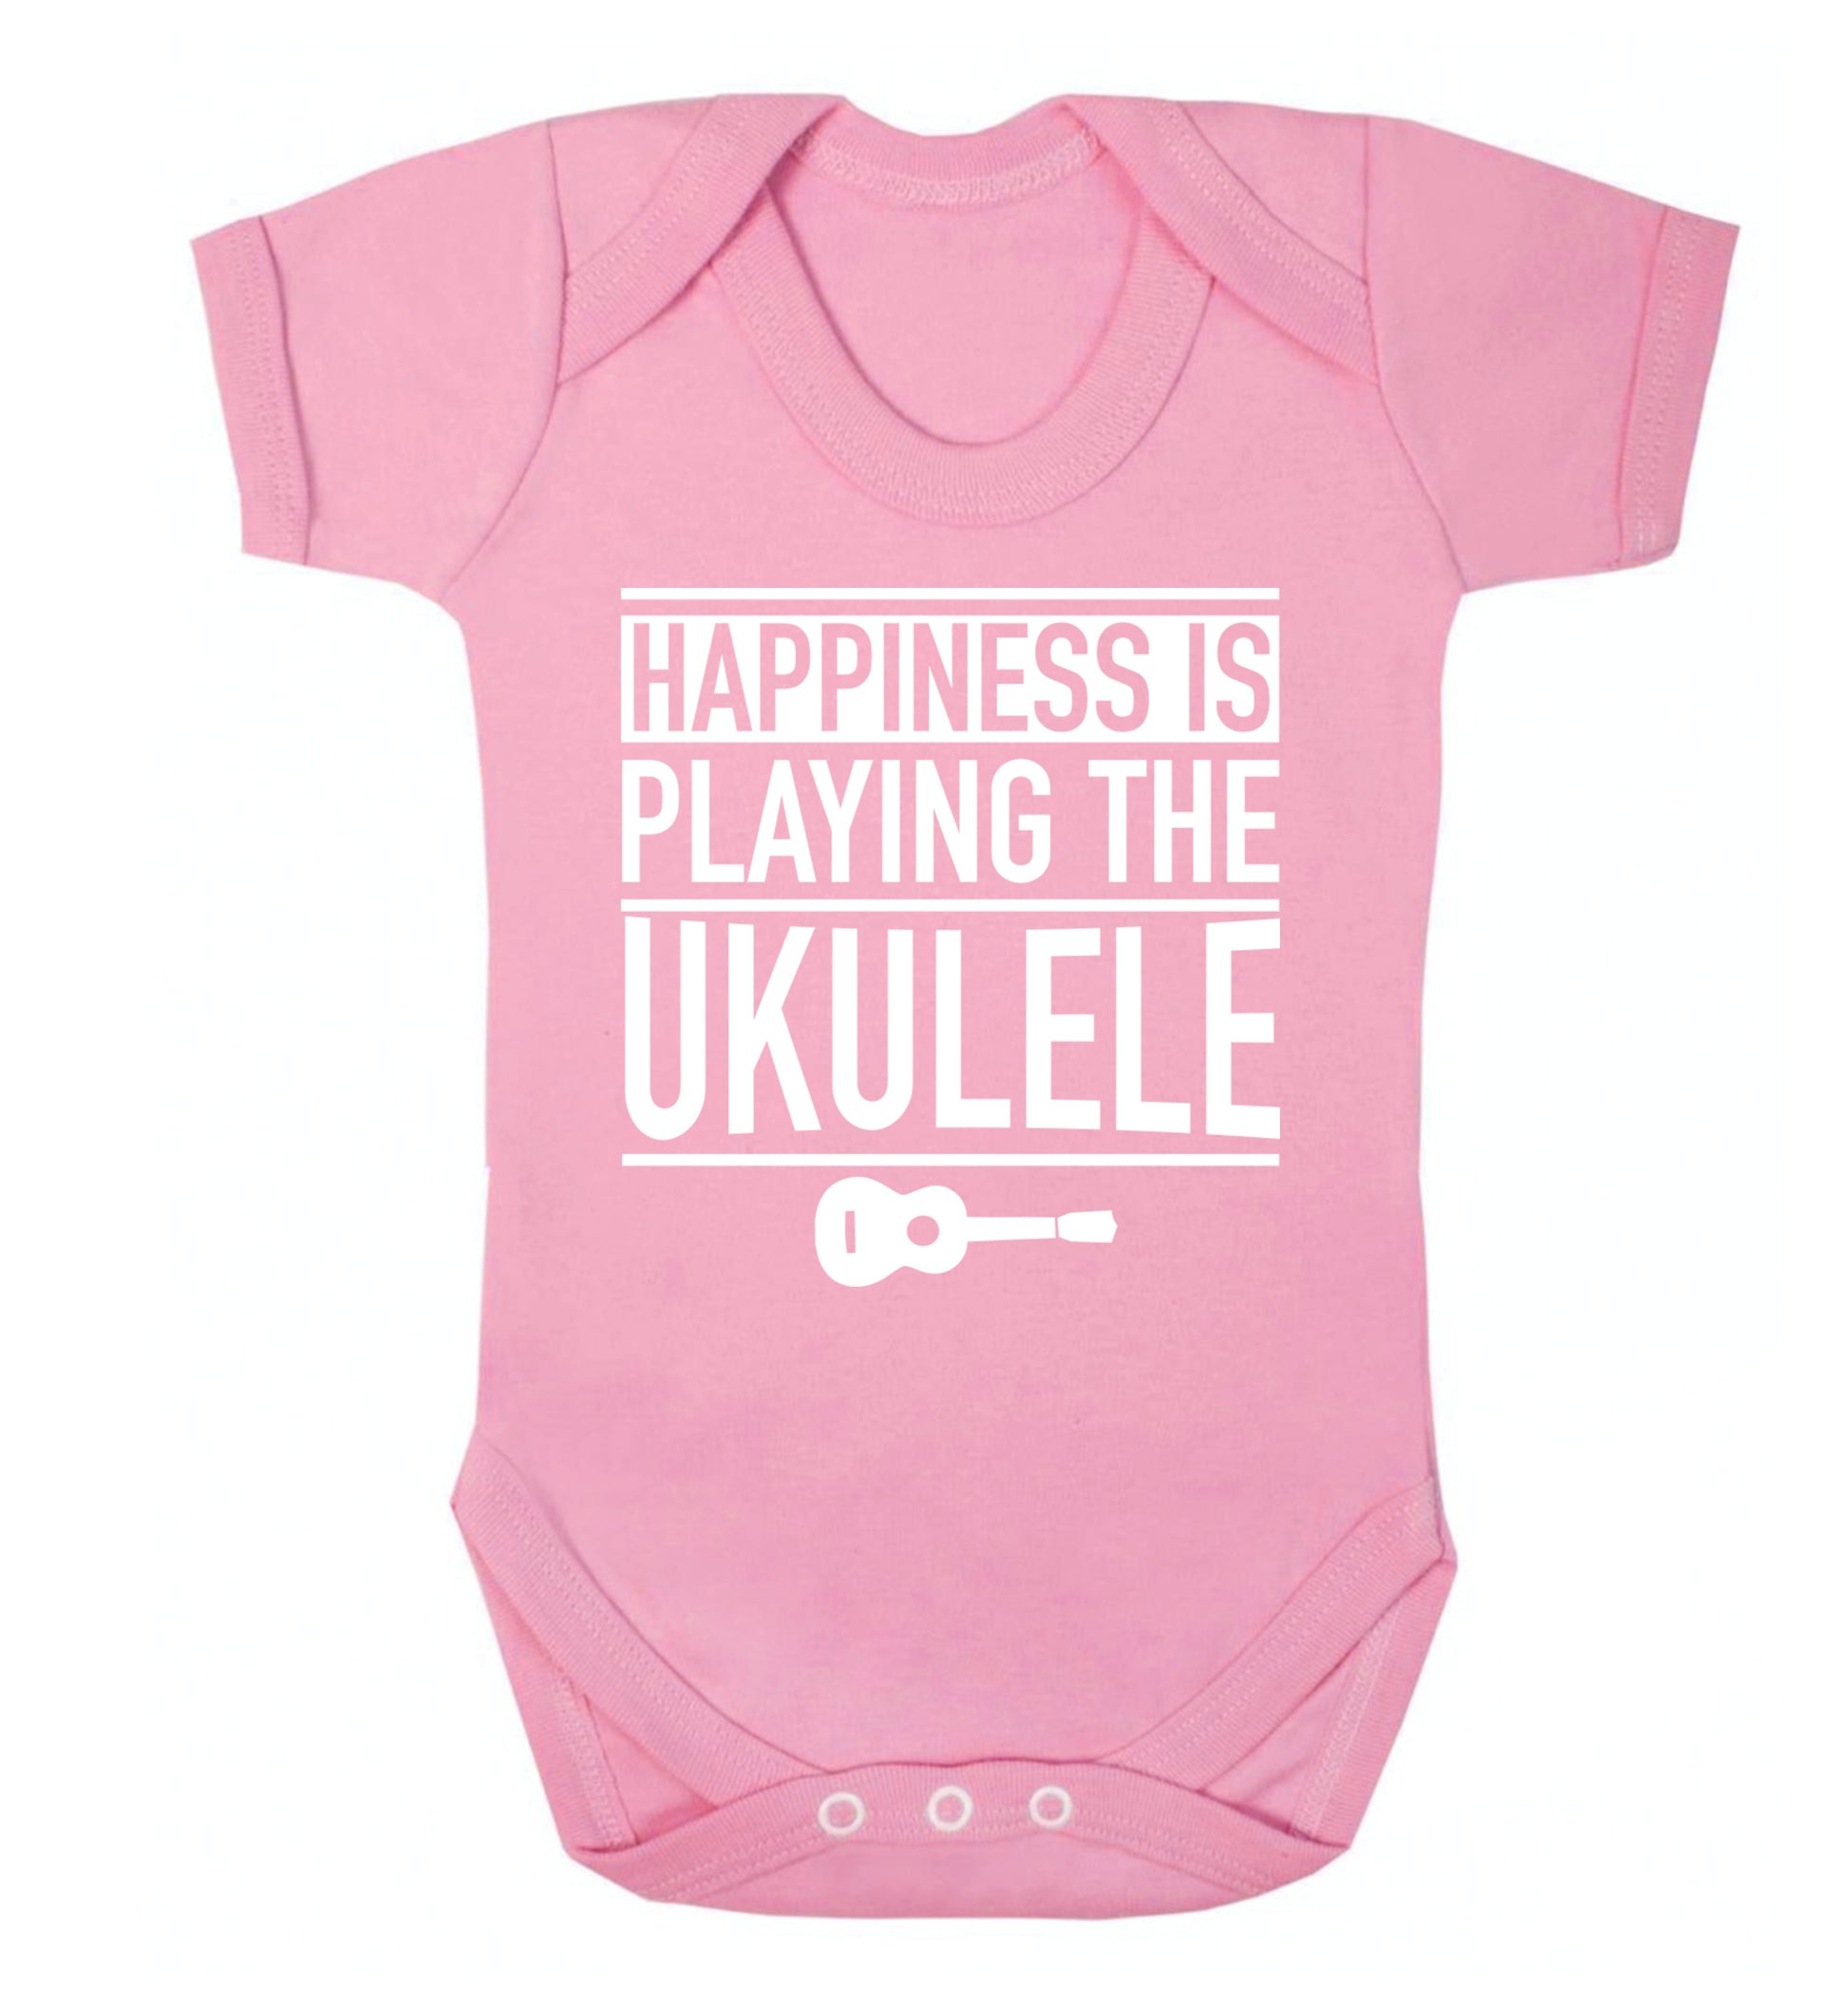 Happines is playing the ukulele Baby Vest pale pink 18-24 months